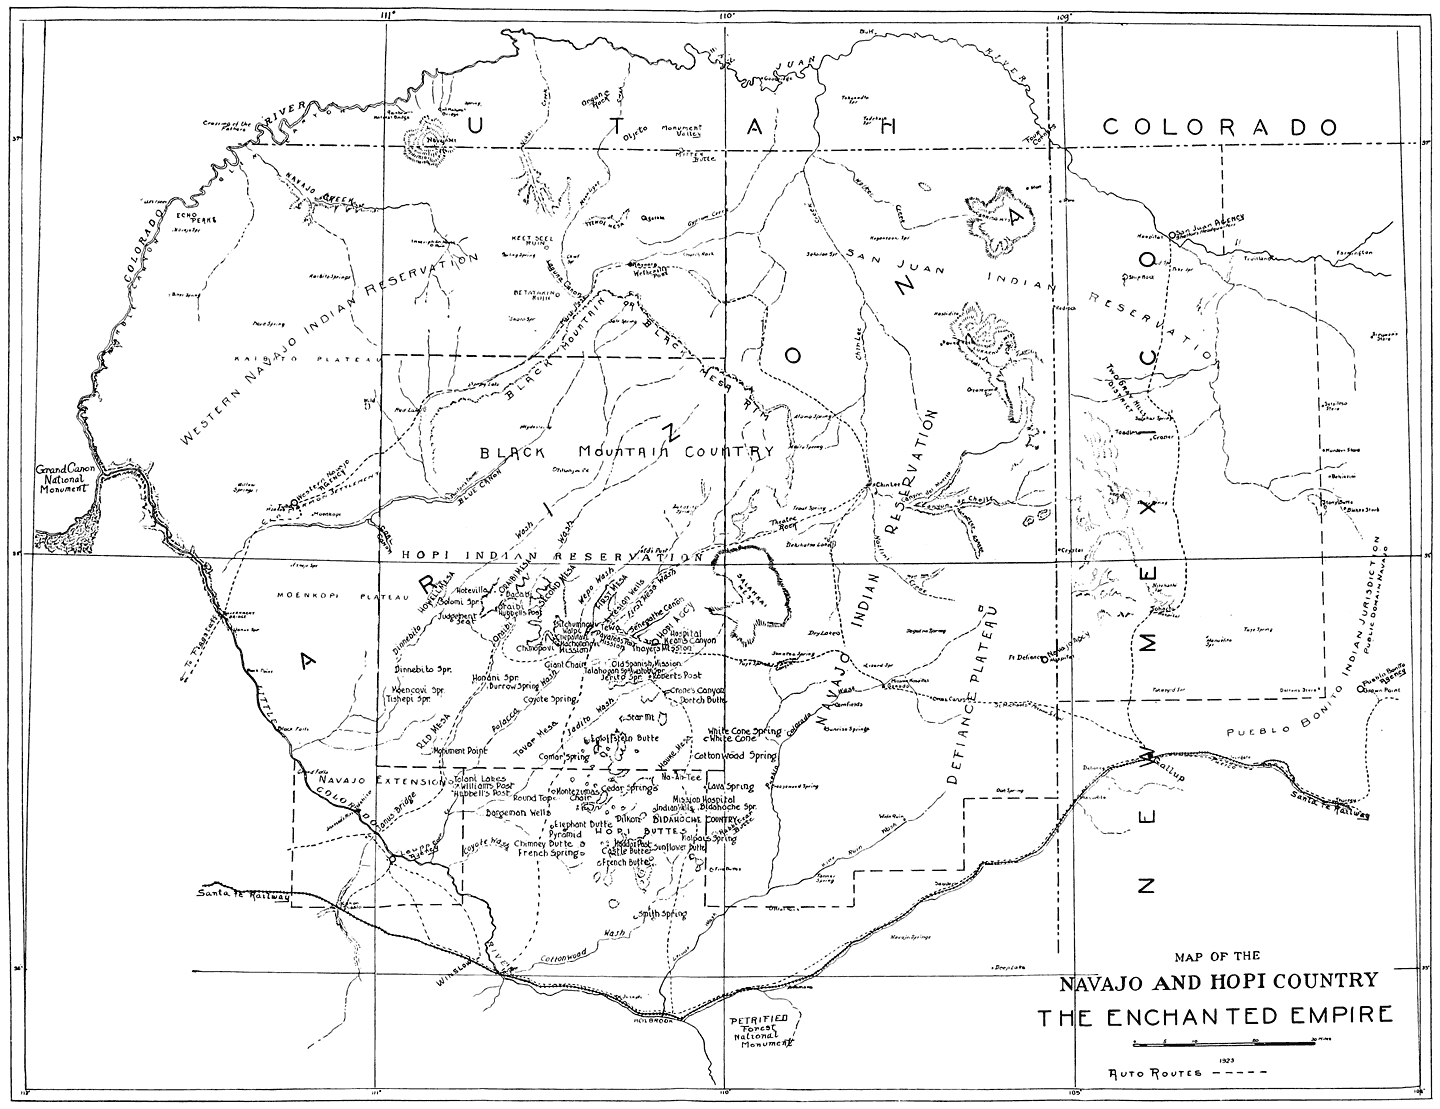 MAP OF THE NAVAJO AND HOPI COUNTRY THE ENCHANTED EMPIRE